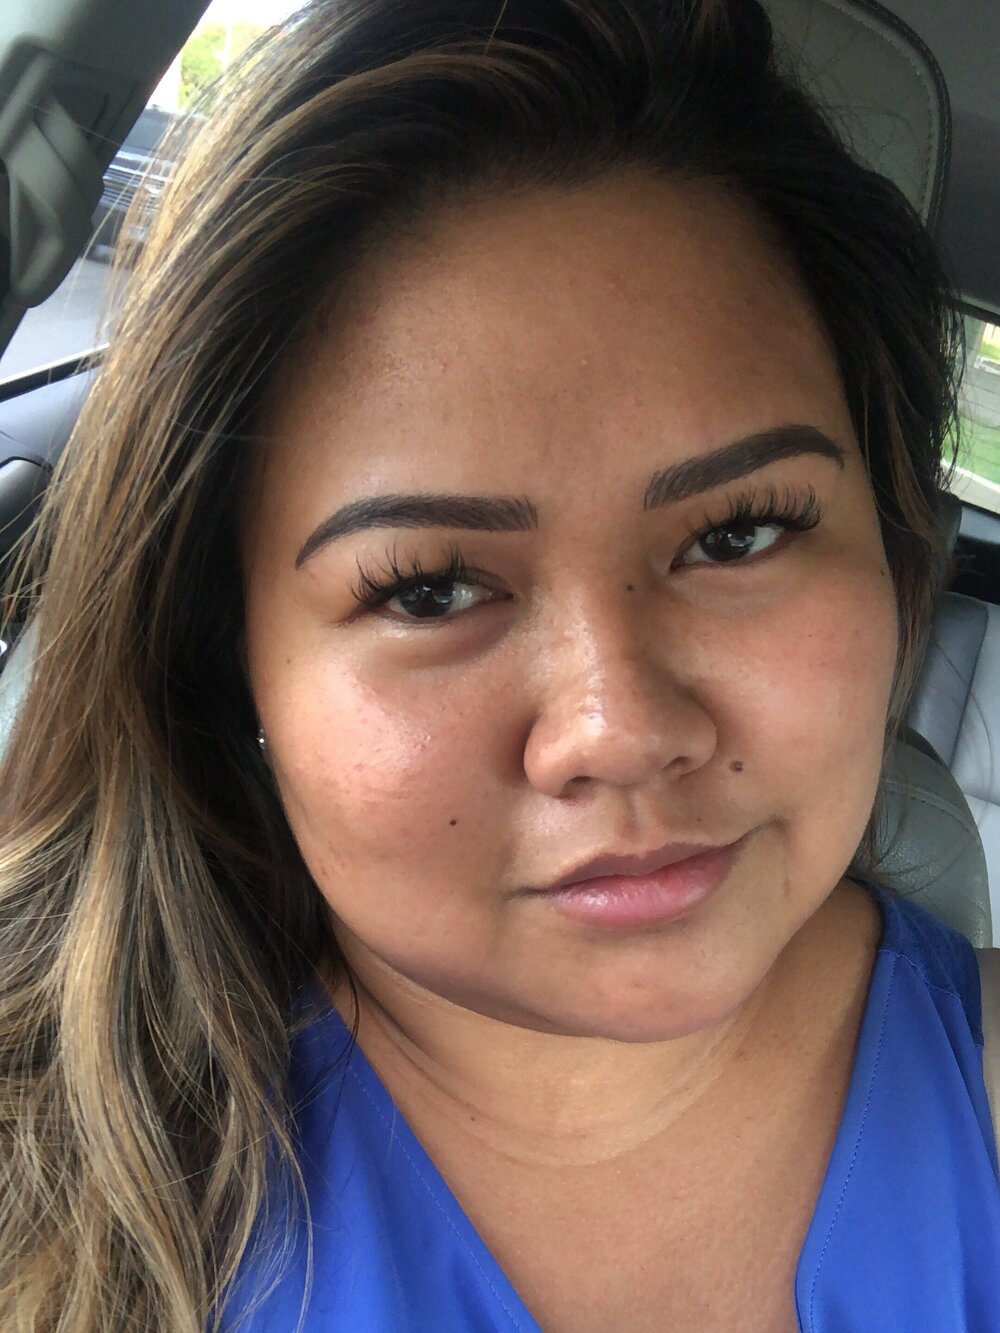  Selfie immediately after the touch-up appointment! Love how well my brows looked!  